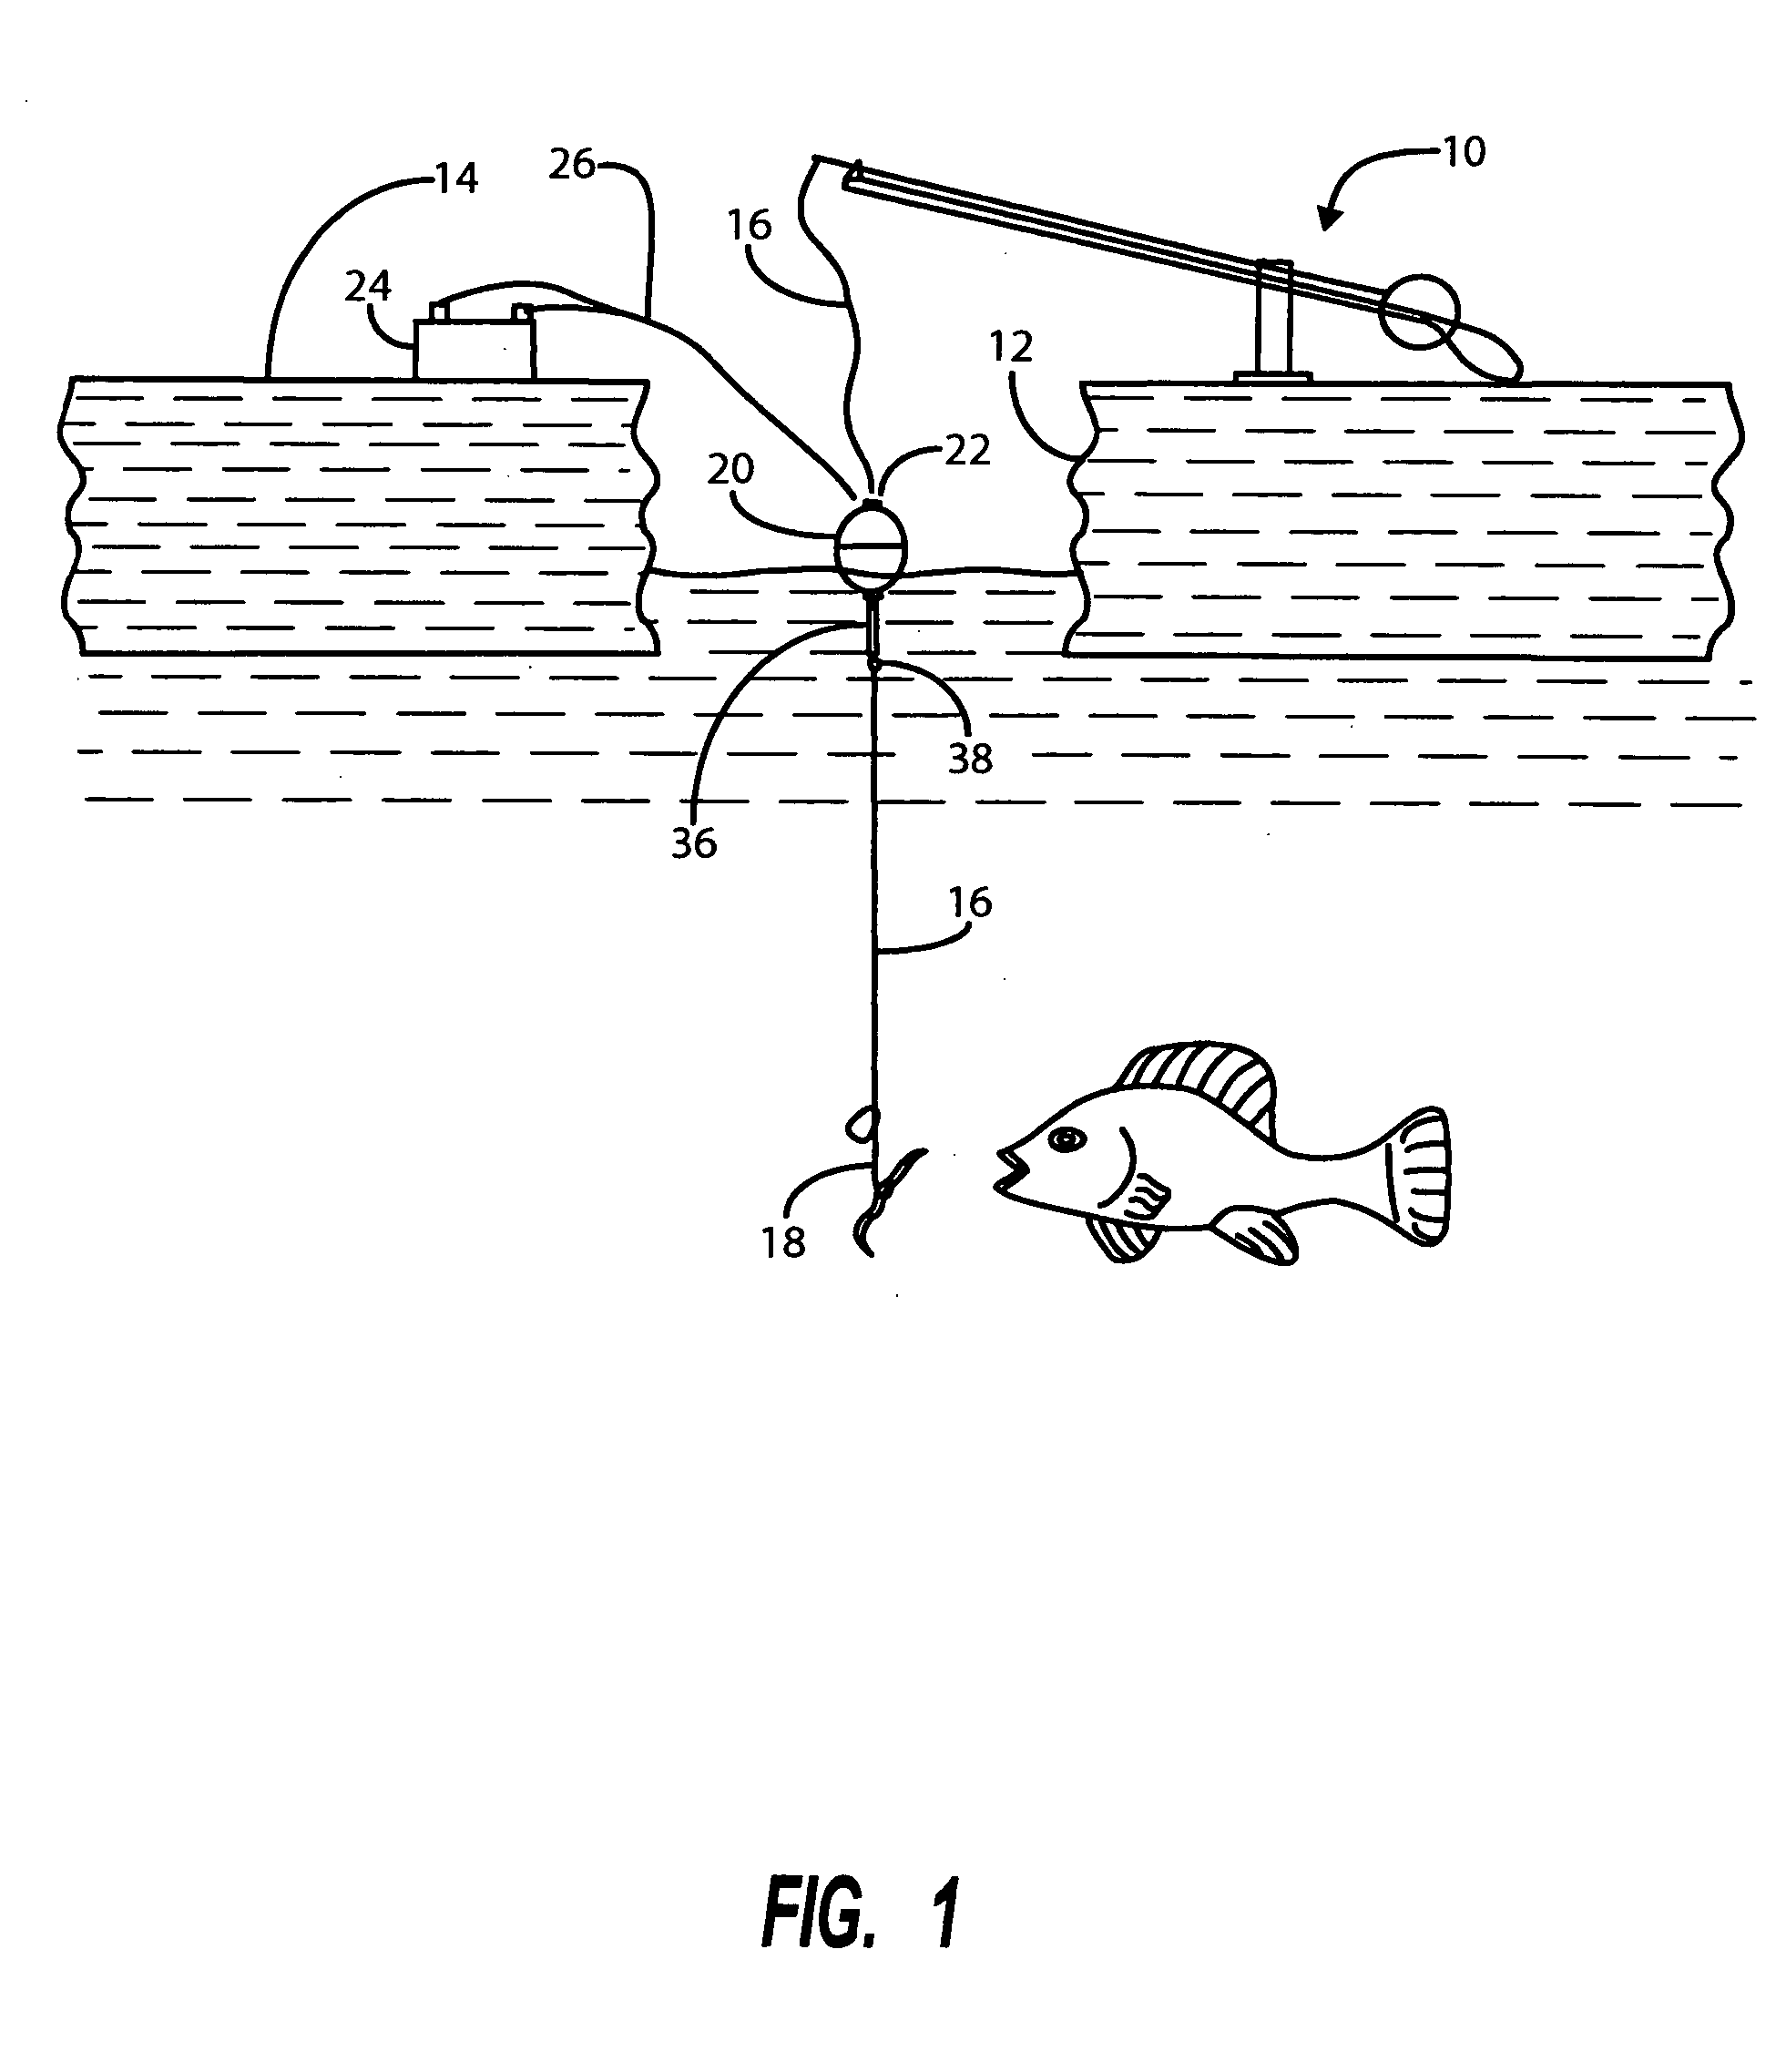 Heated bobber for use in ice fishing